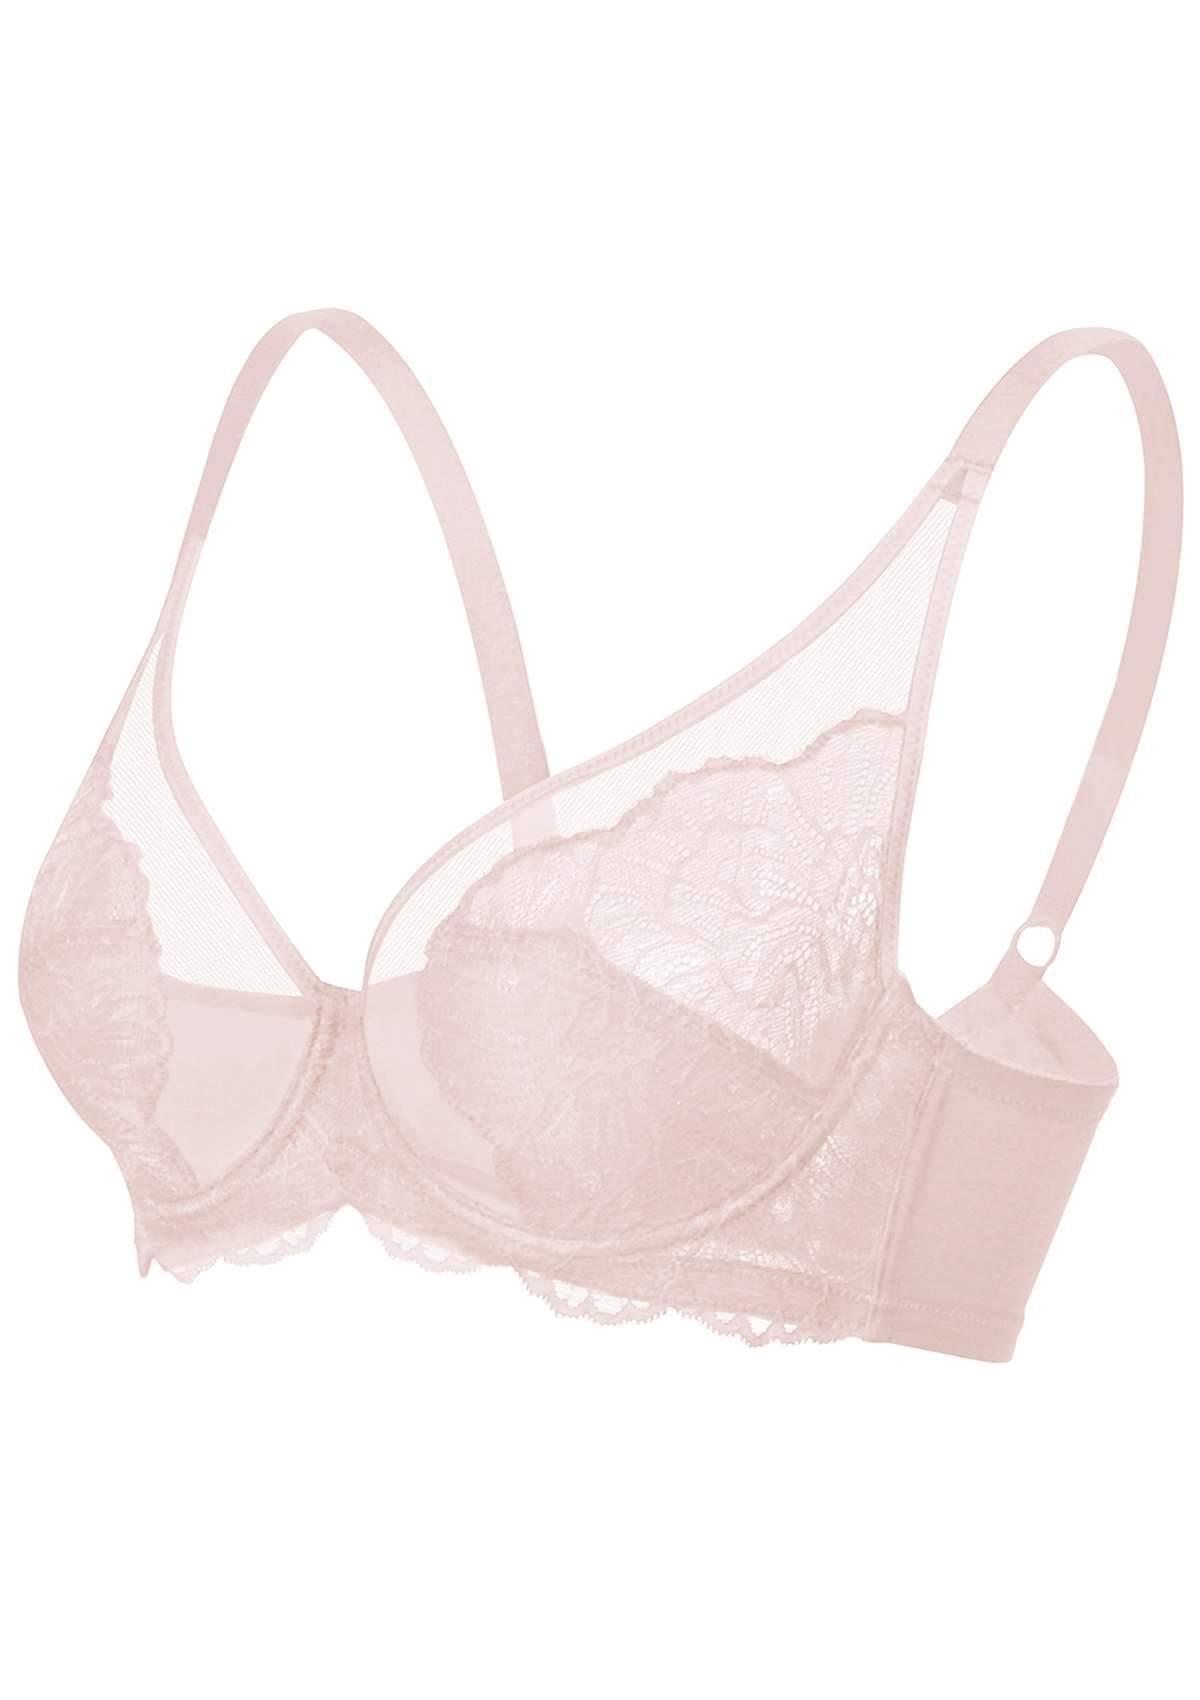 HSIA Blossom Lace Bra And Panties Set: Best Bra For Large Busts - Dark Pink / 36 / I